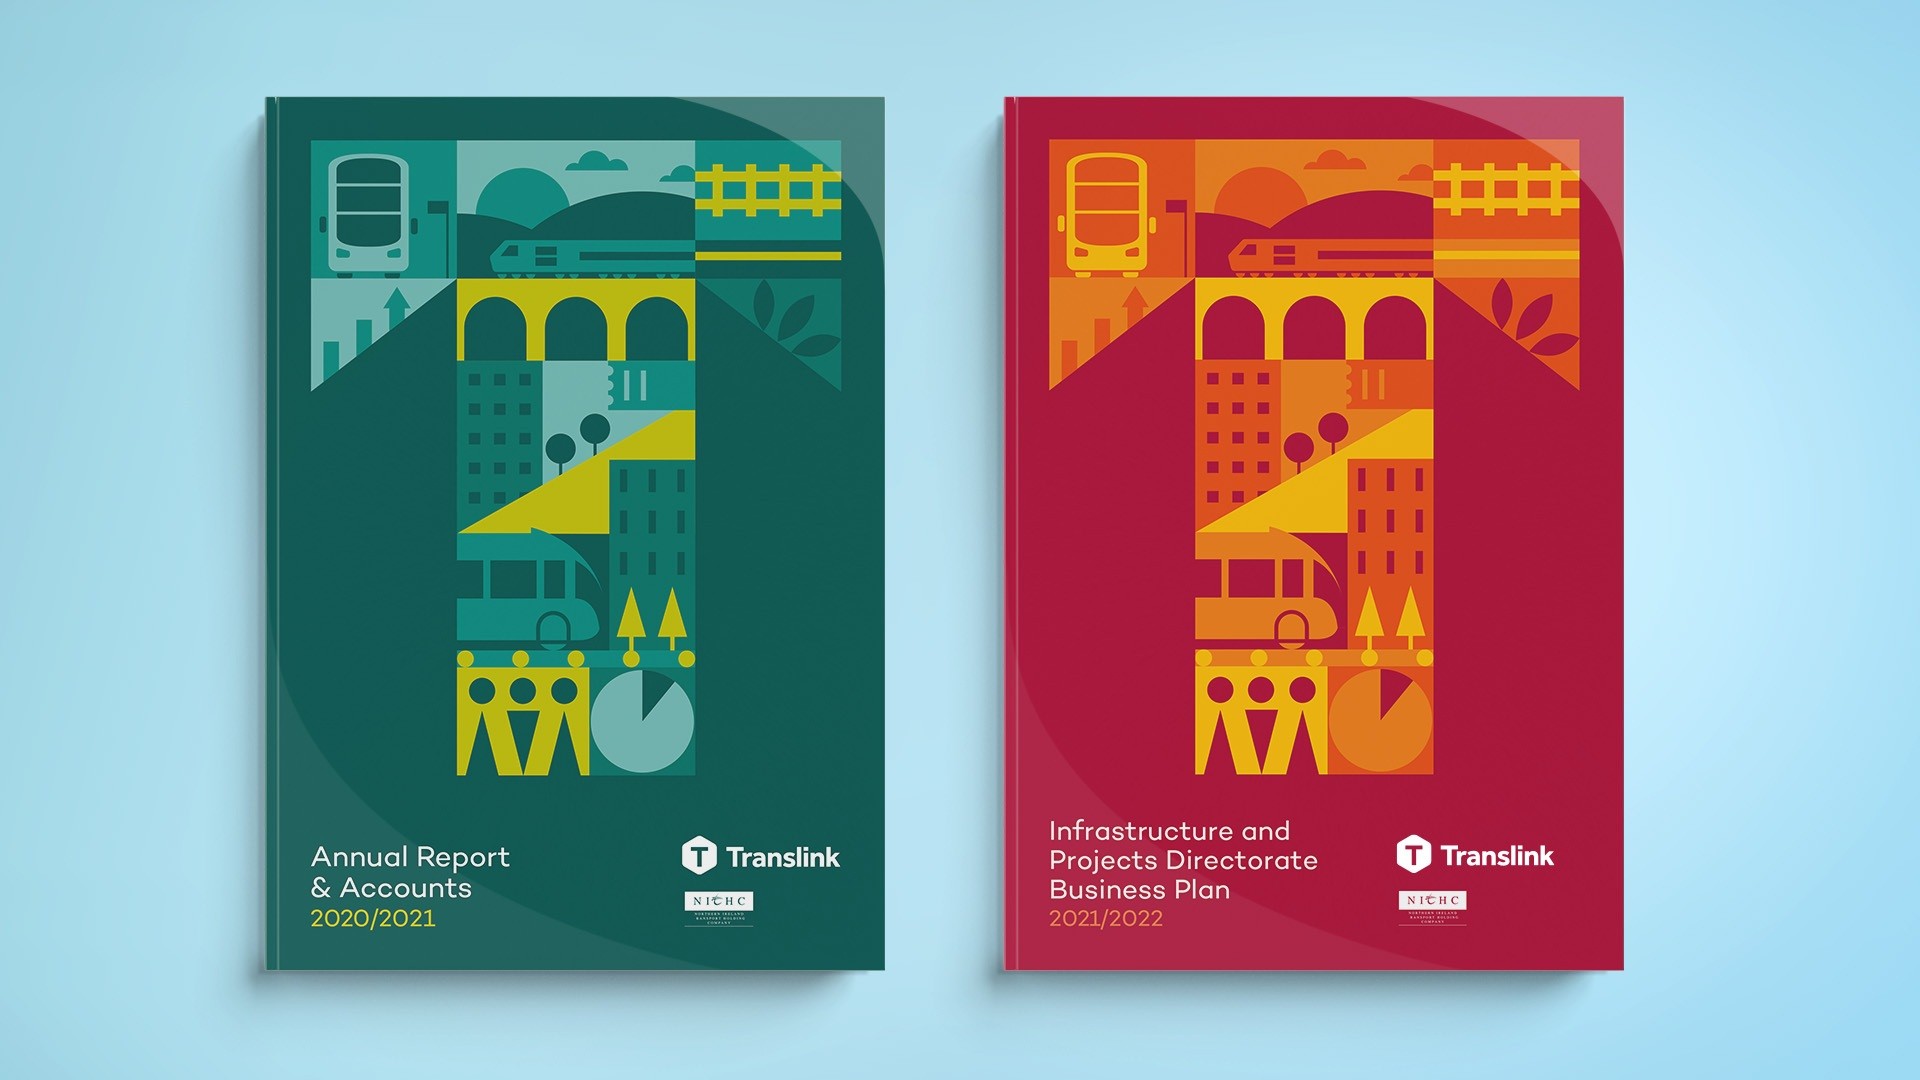 Translink Annual Report Covers